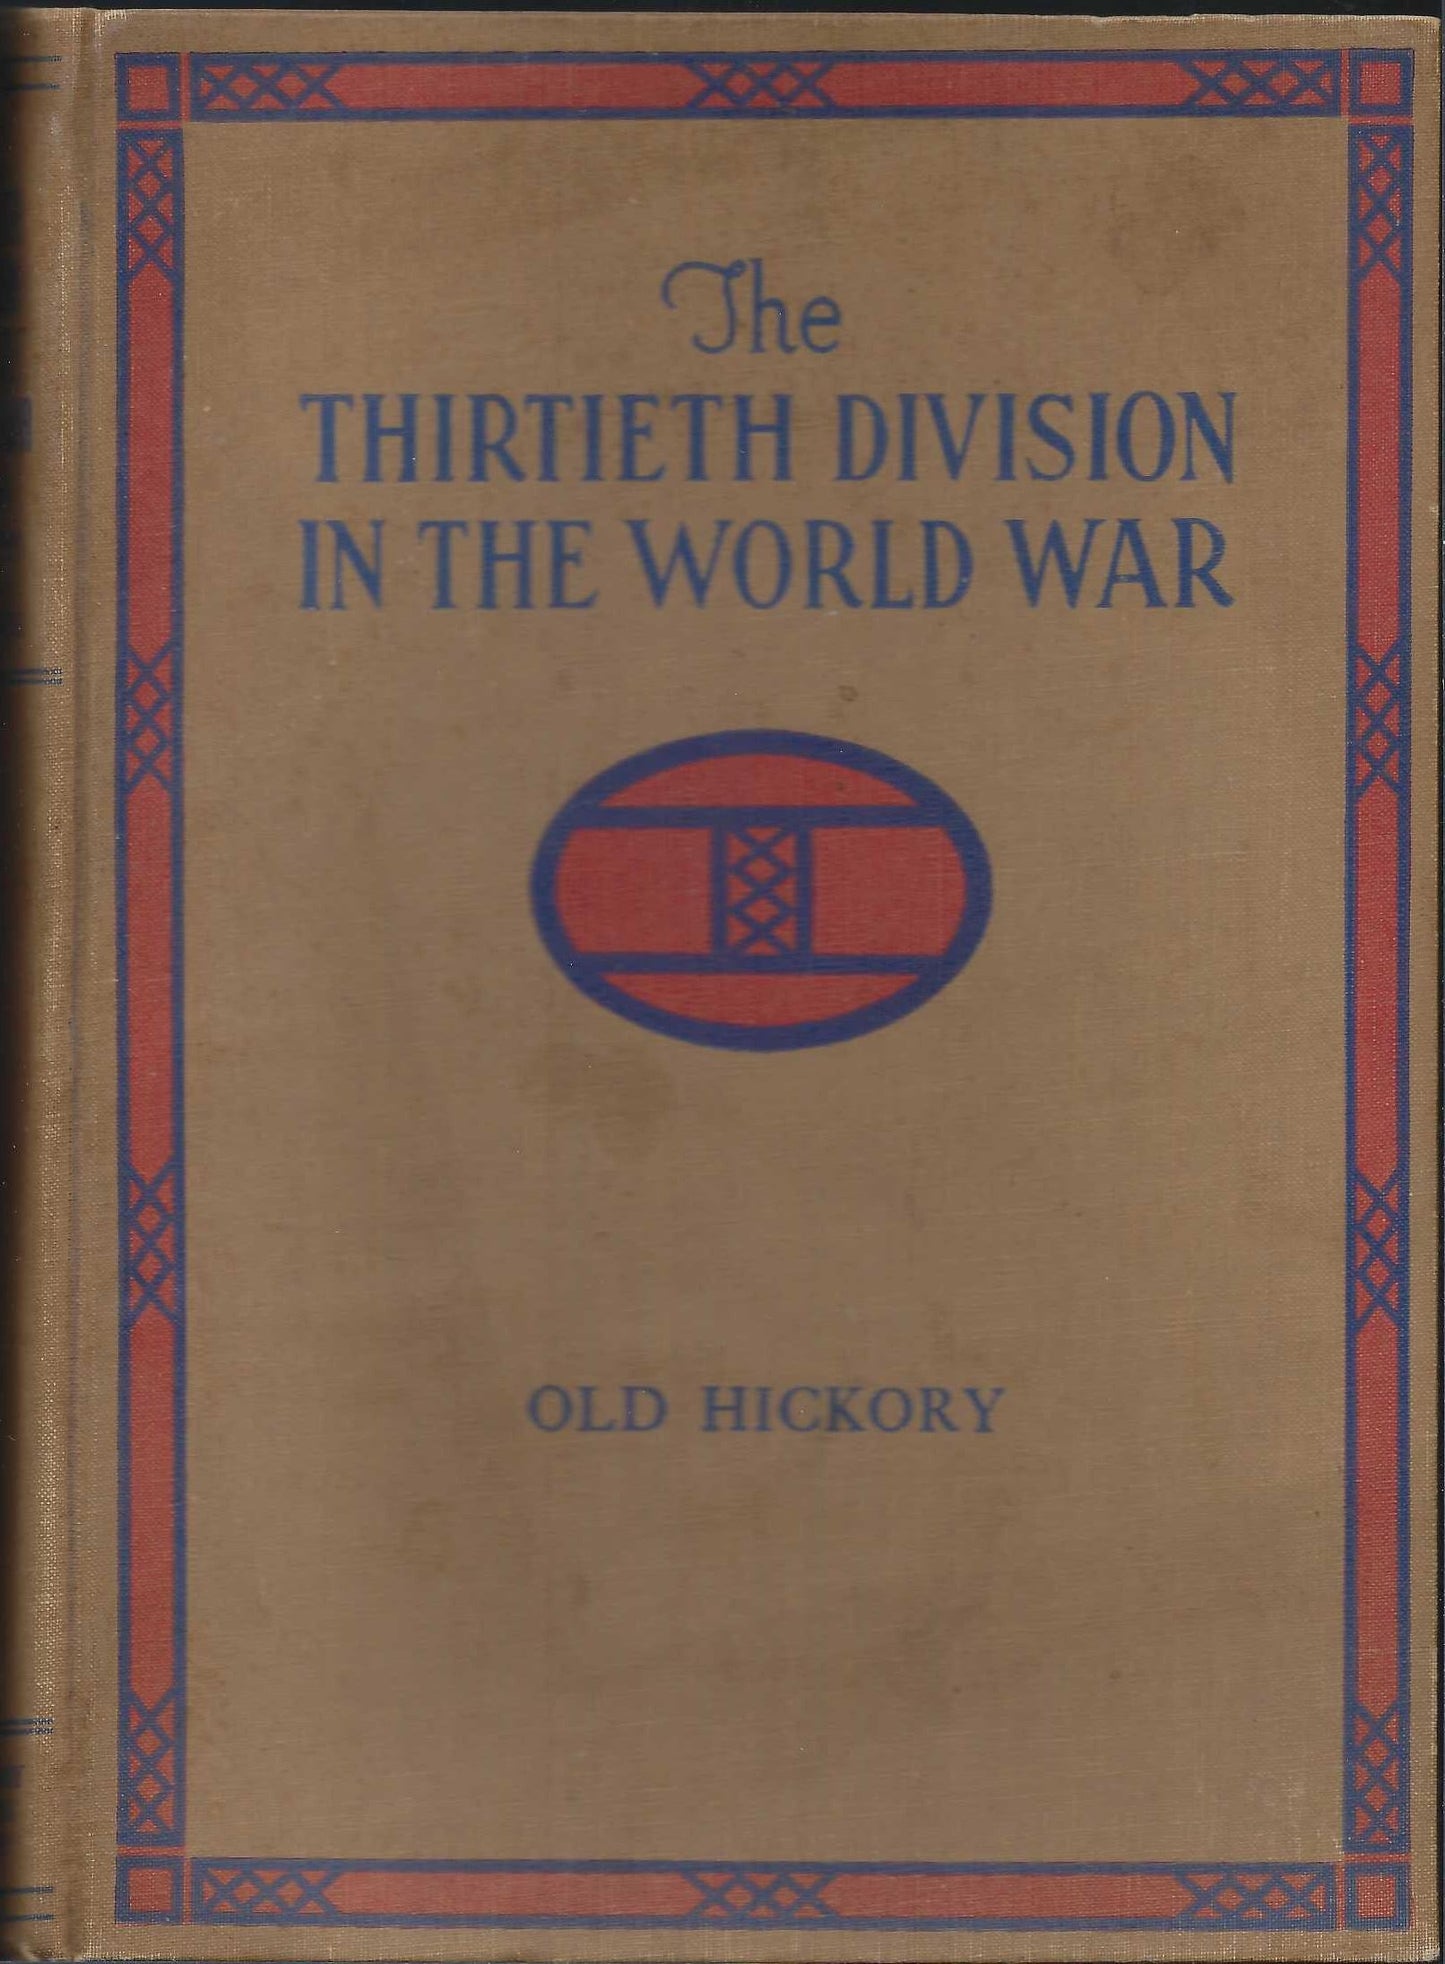 Thirtieth Division in the World War cover